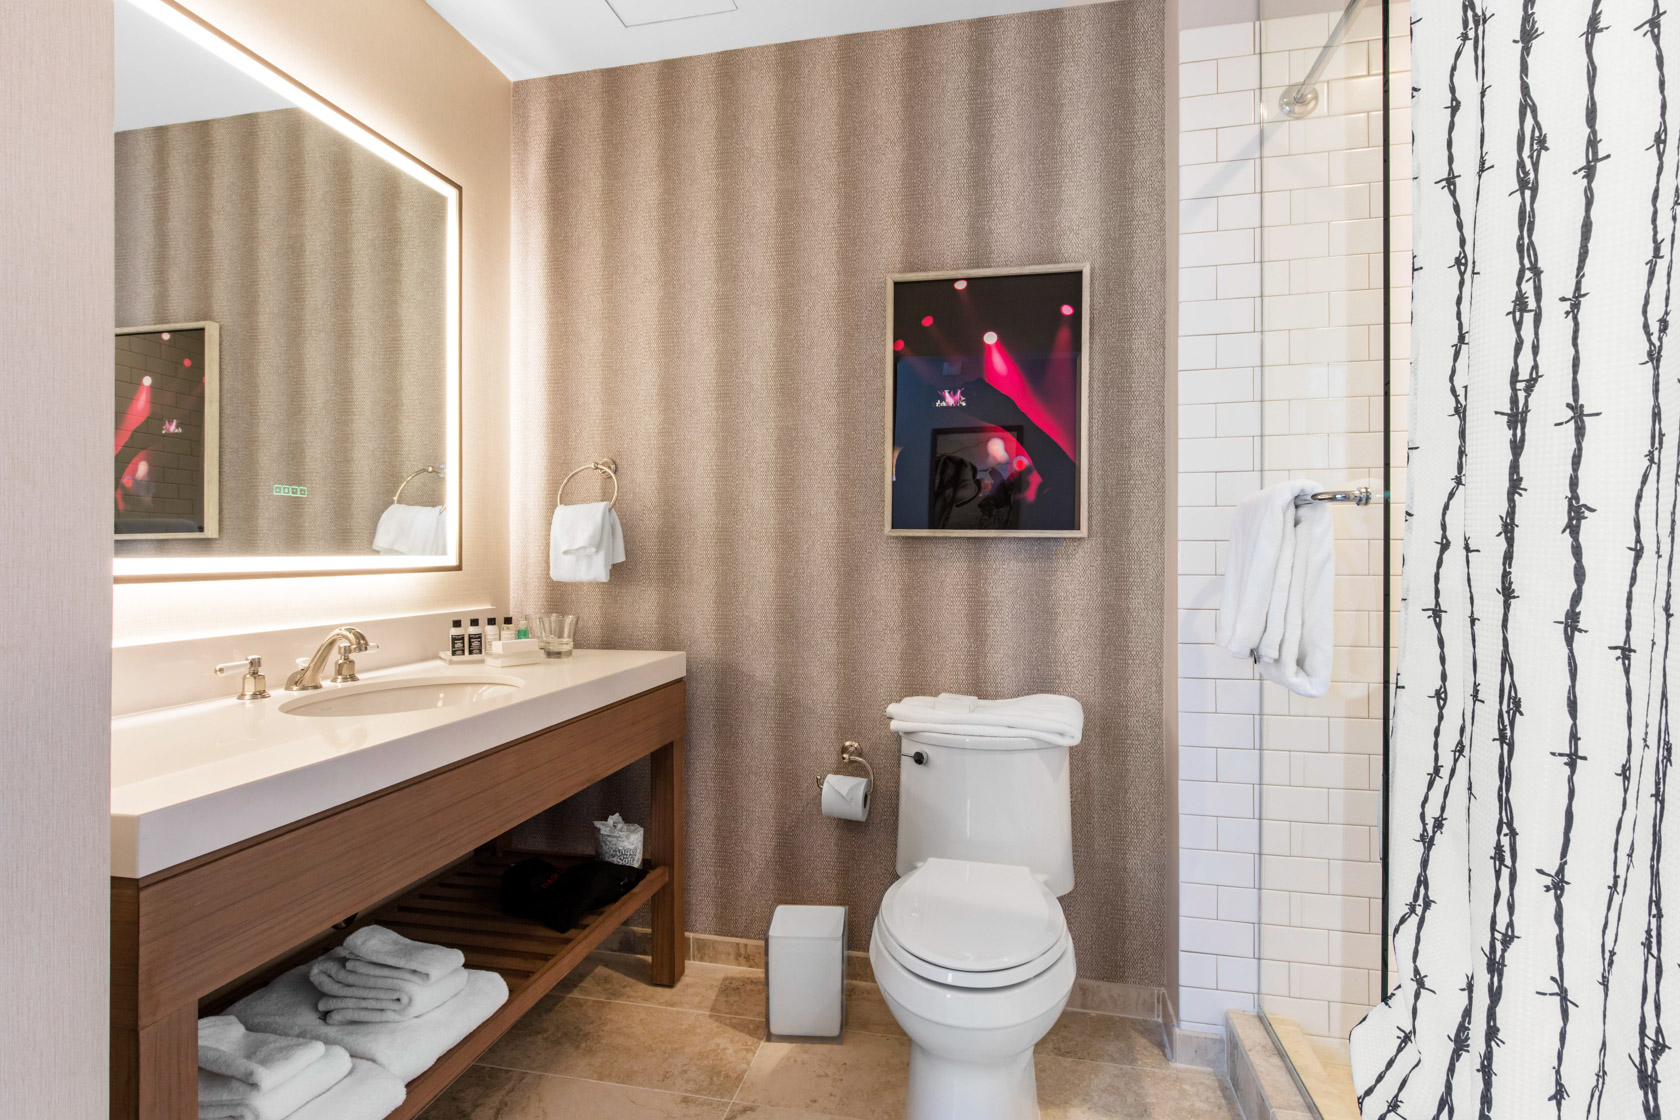 gallery View of a hotel washroom with features as a toilet, rectangular stylish mirror and some towels